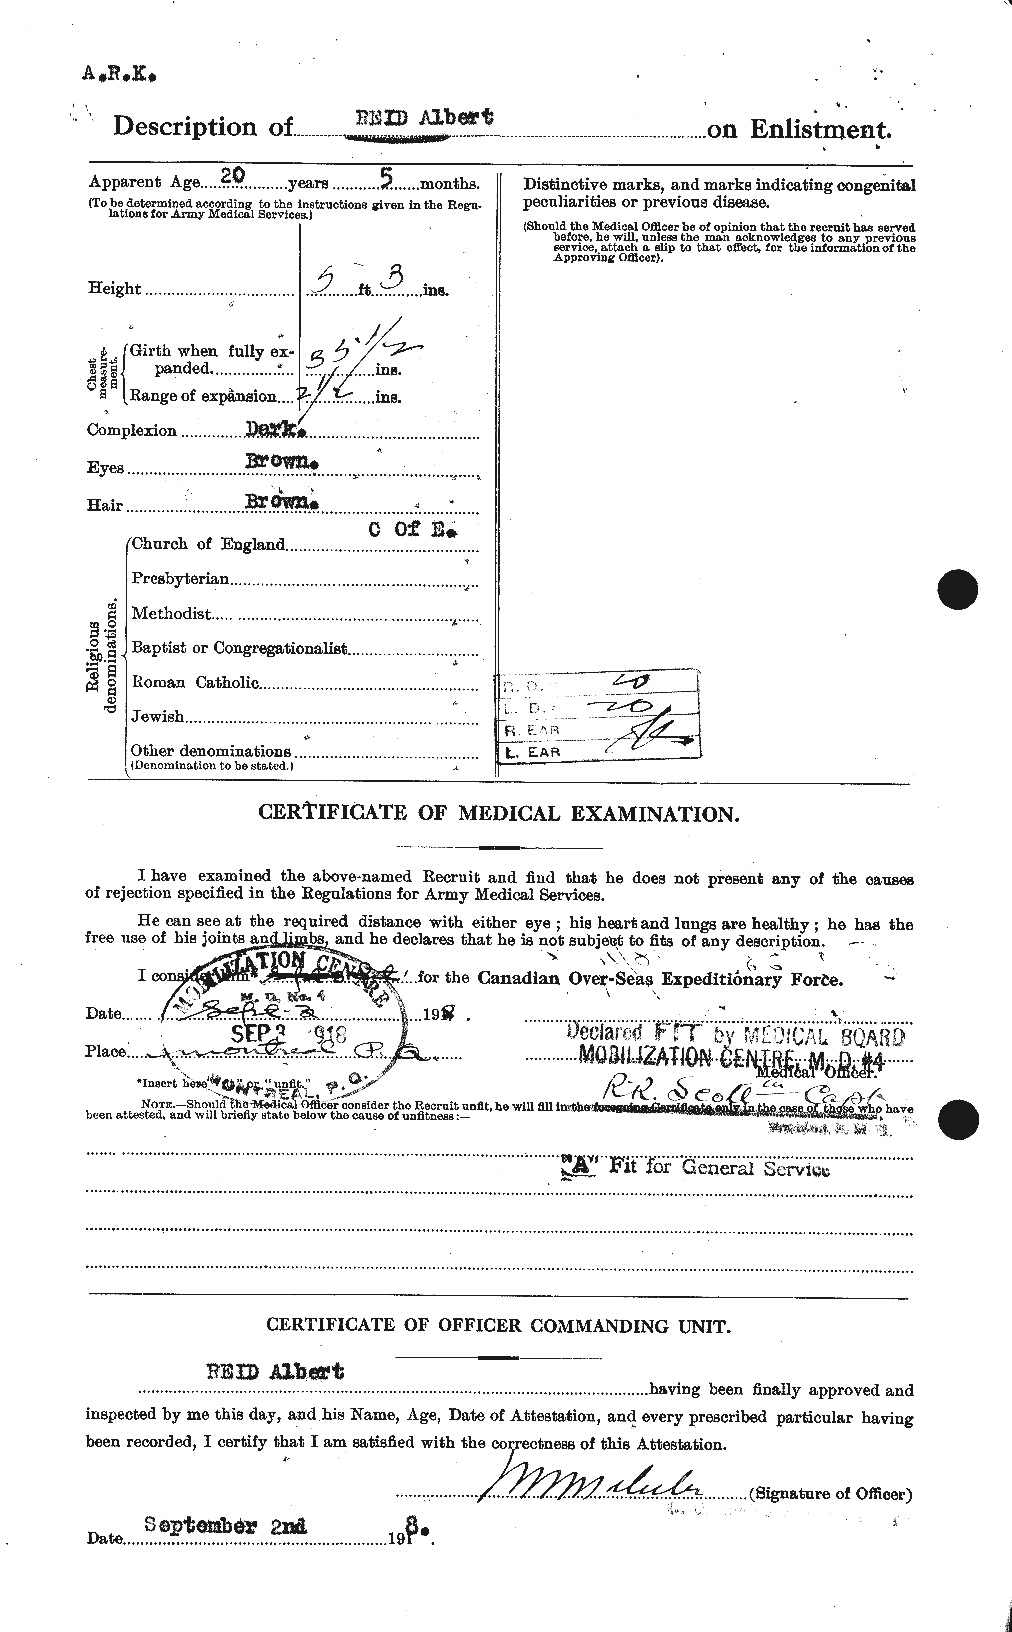 Personnel Records of the First World War - CEF 597742b